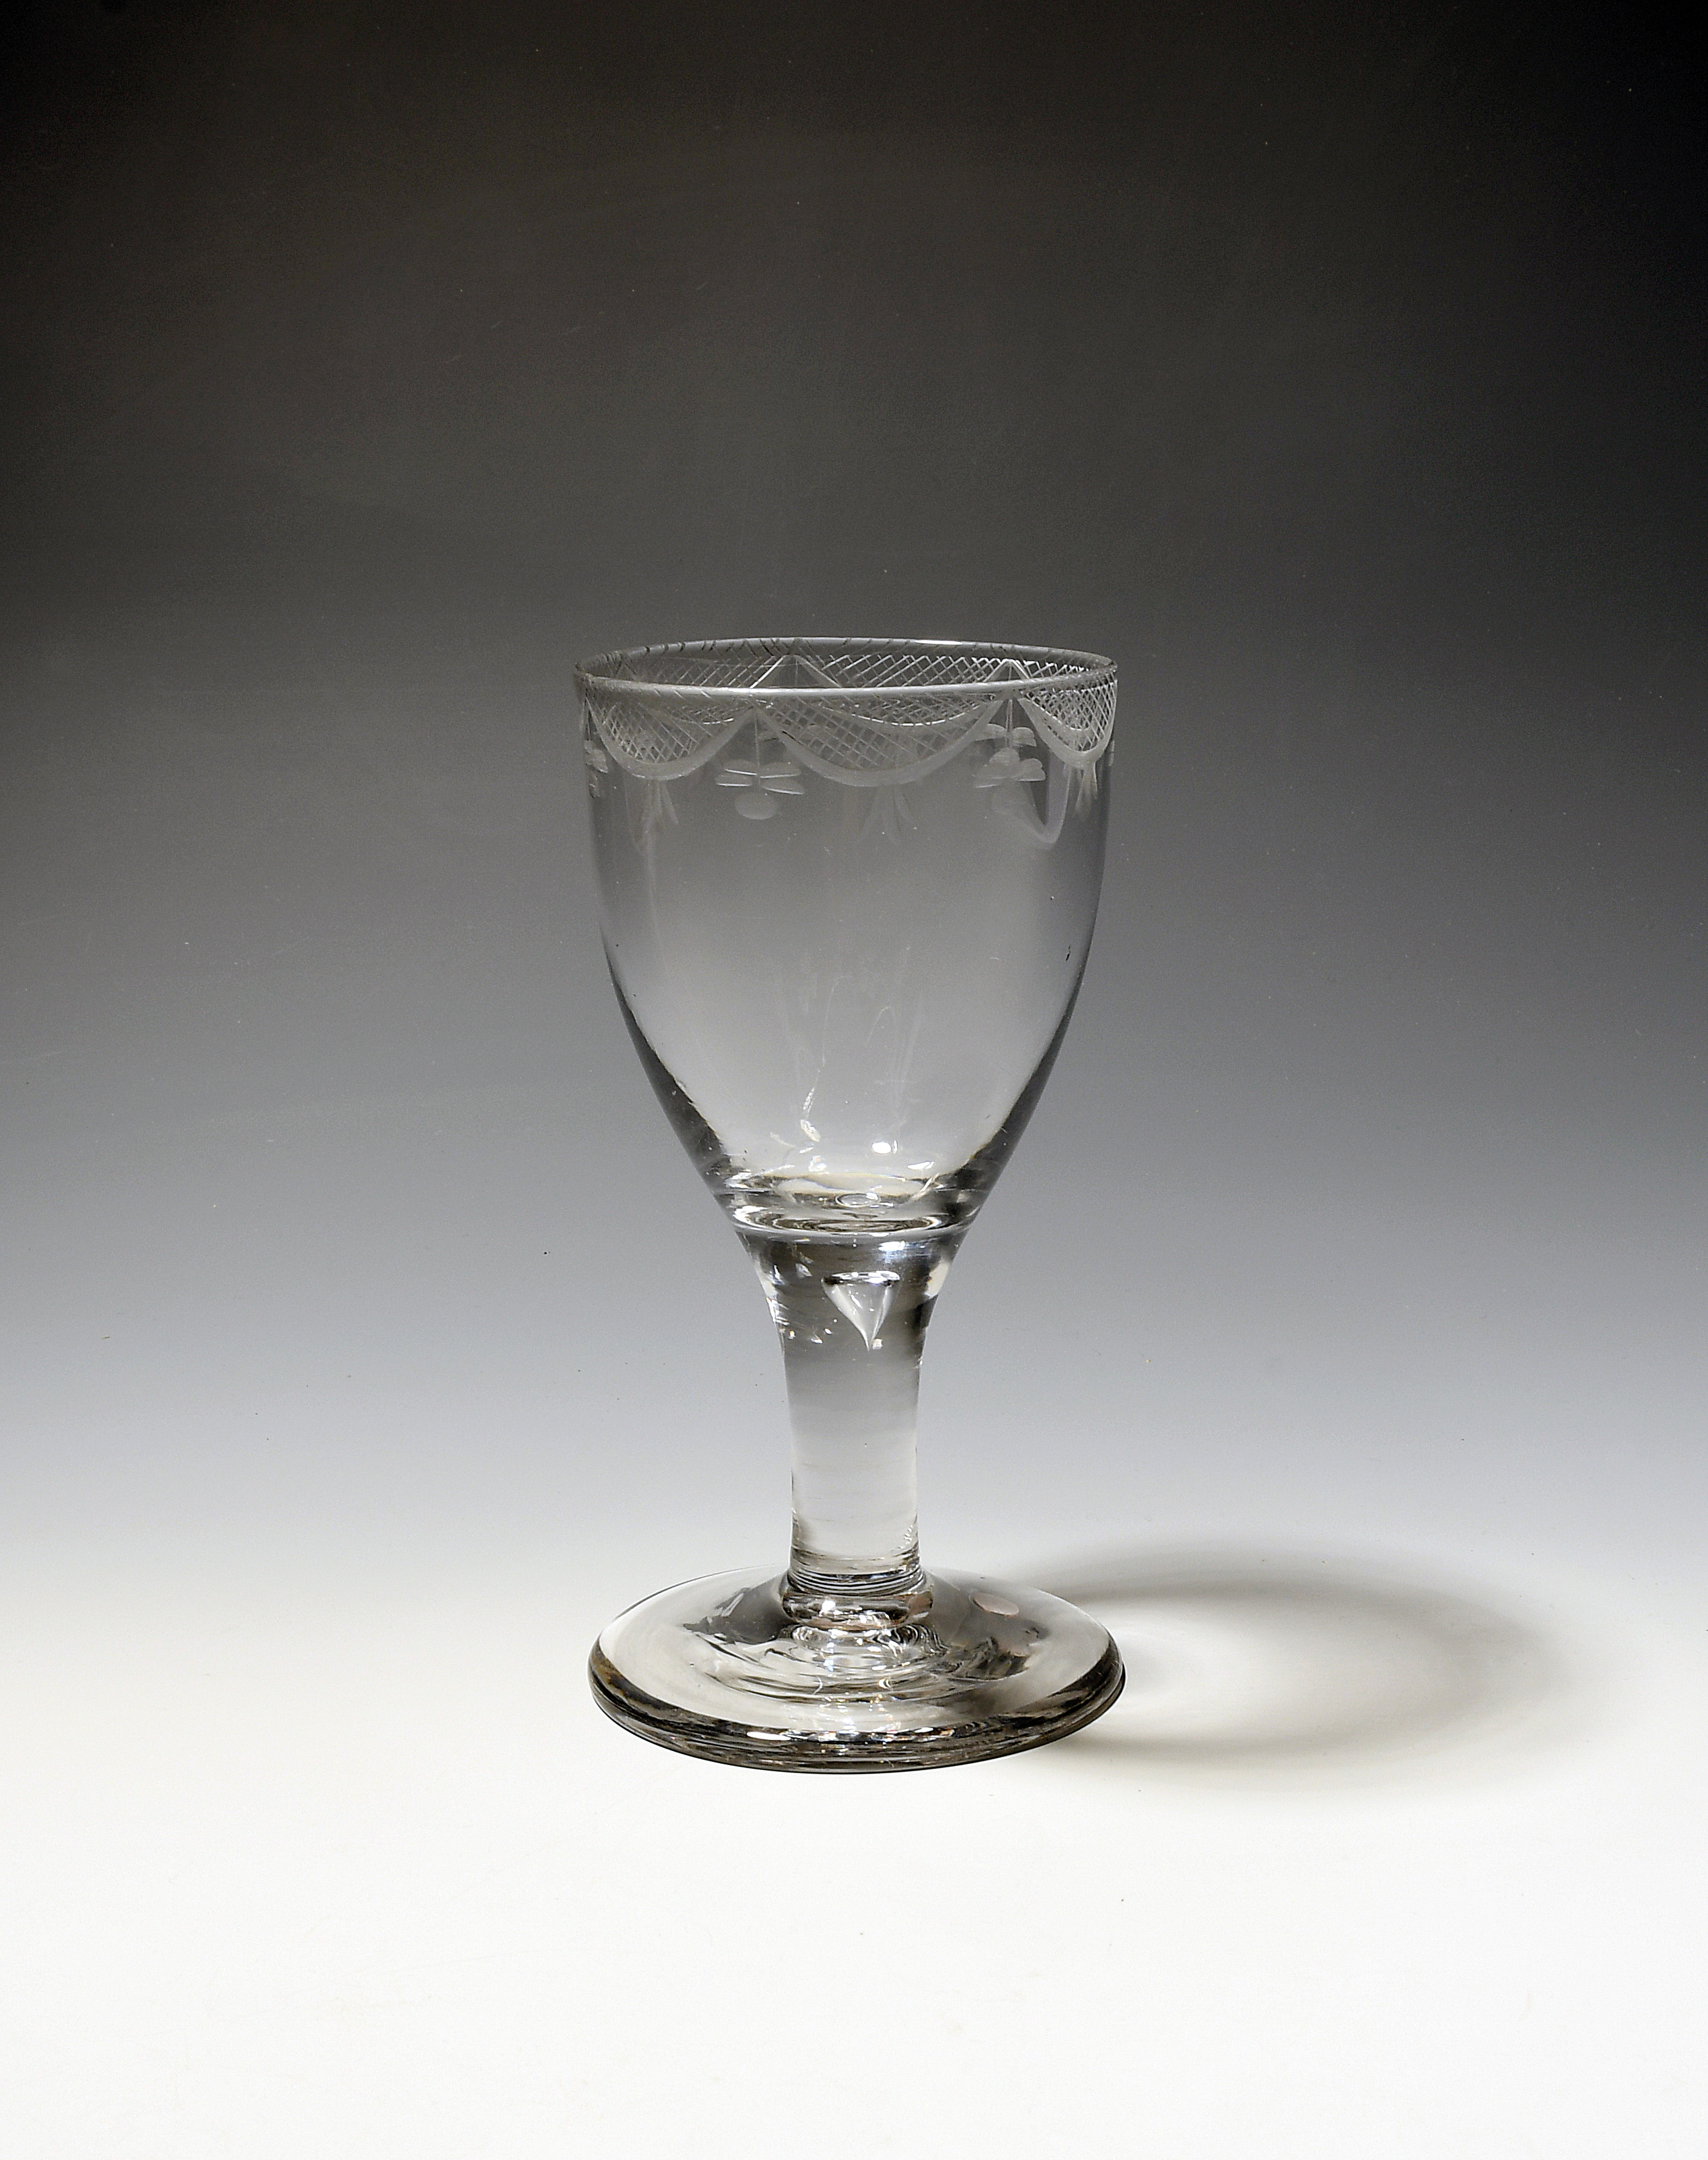 A large wine glass or goblet c.1750-60, the rounded funnel bowl engraved with a border of hatched